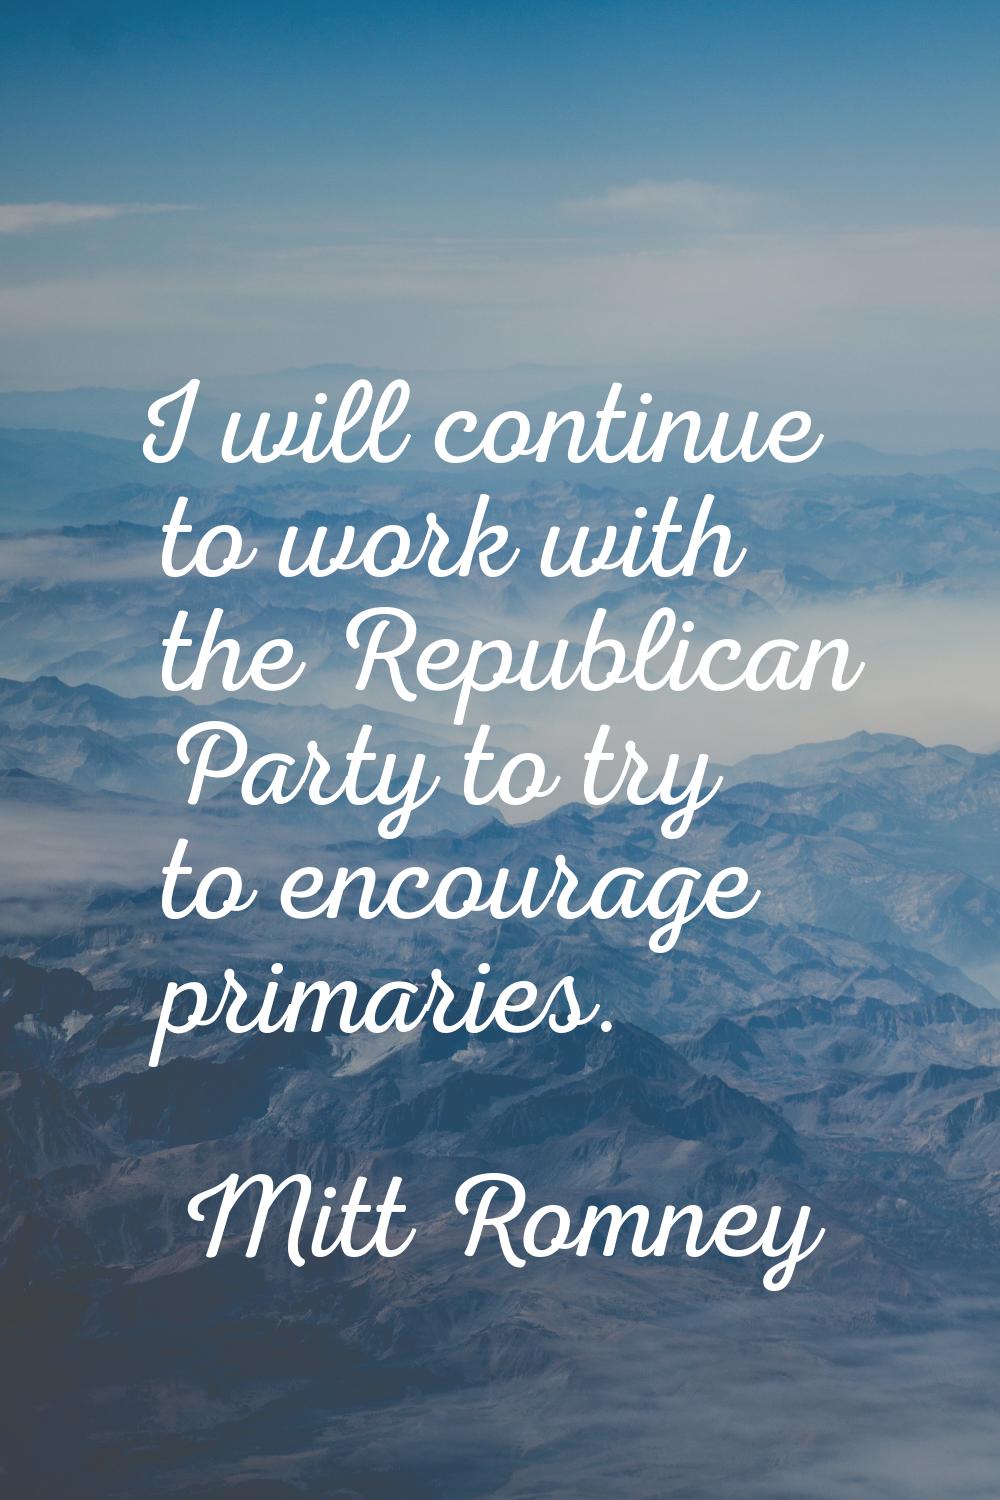 I will continue to work with the Republican Party to try to encourage primaries.